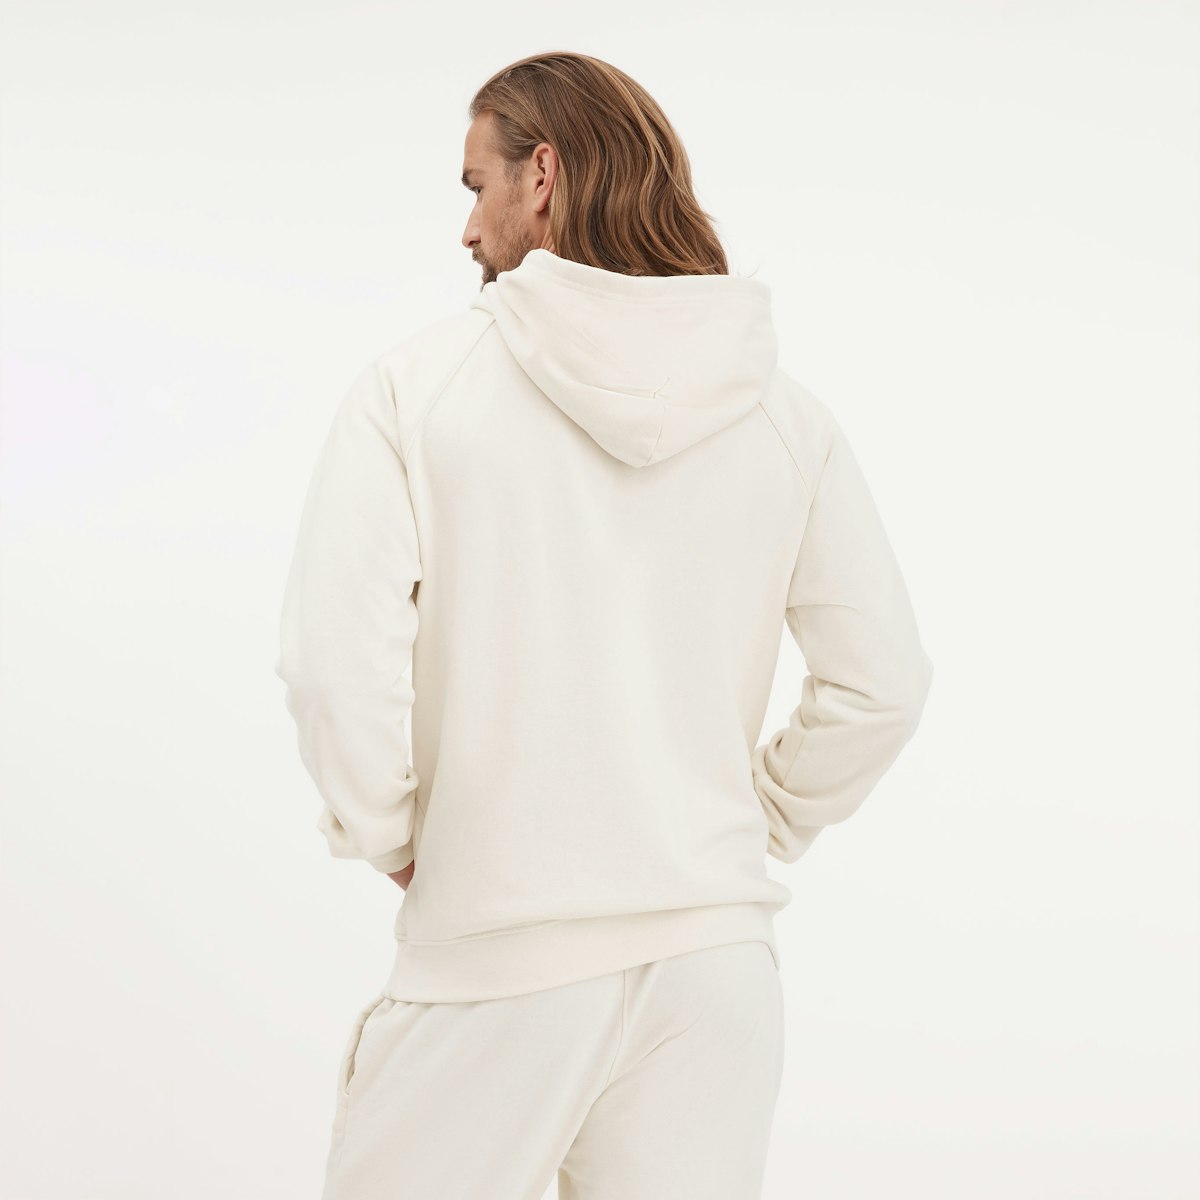 UnisexRecycledTerryHoodie_OffWhite_Mens_OnFigure_1x1_0985.jpg